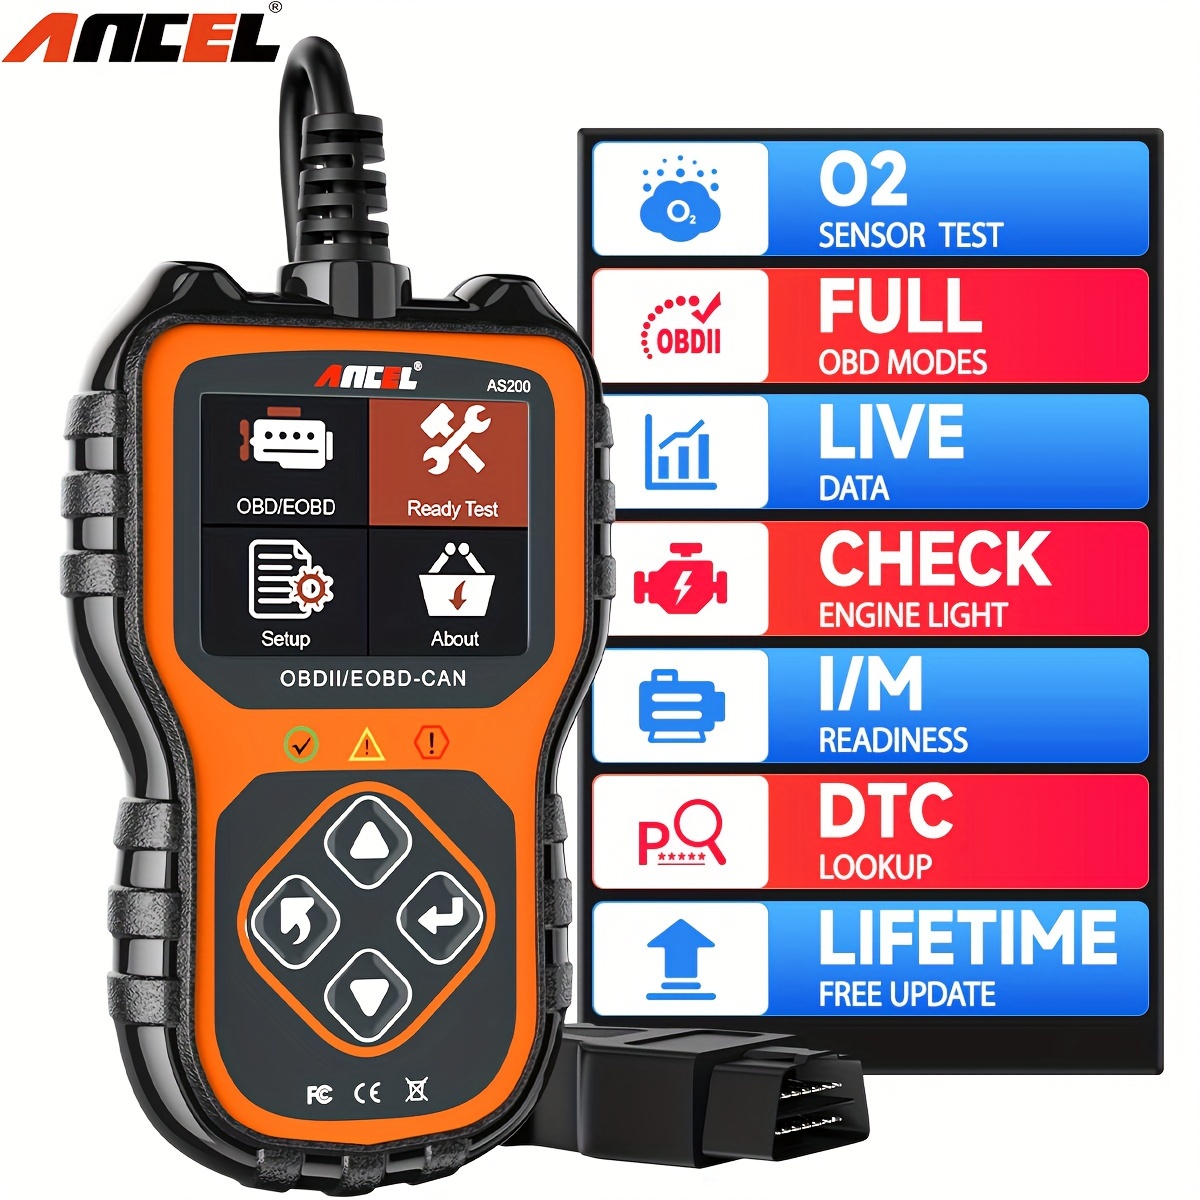 

Ancel As200 Auto Scanner - Advanced Code Reader With Real-time Data Stream, Comprehensive Vehicle Diagnostics Tool For Easy Engine Health Checks, User-friendly Obd2 Diagnostic Solutions For Most Cars